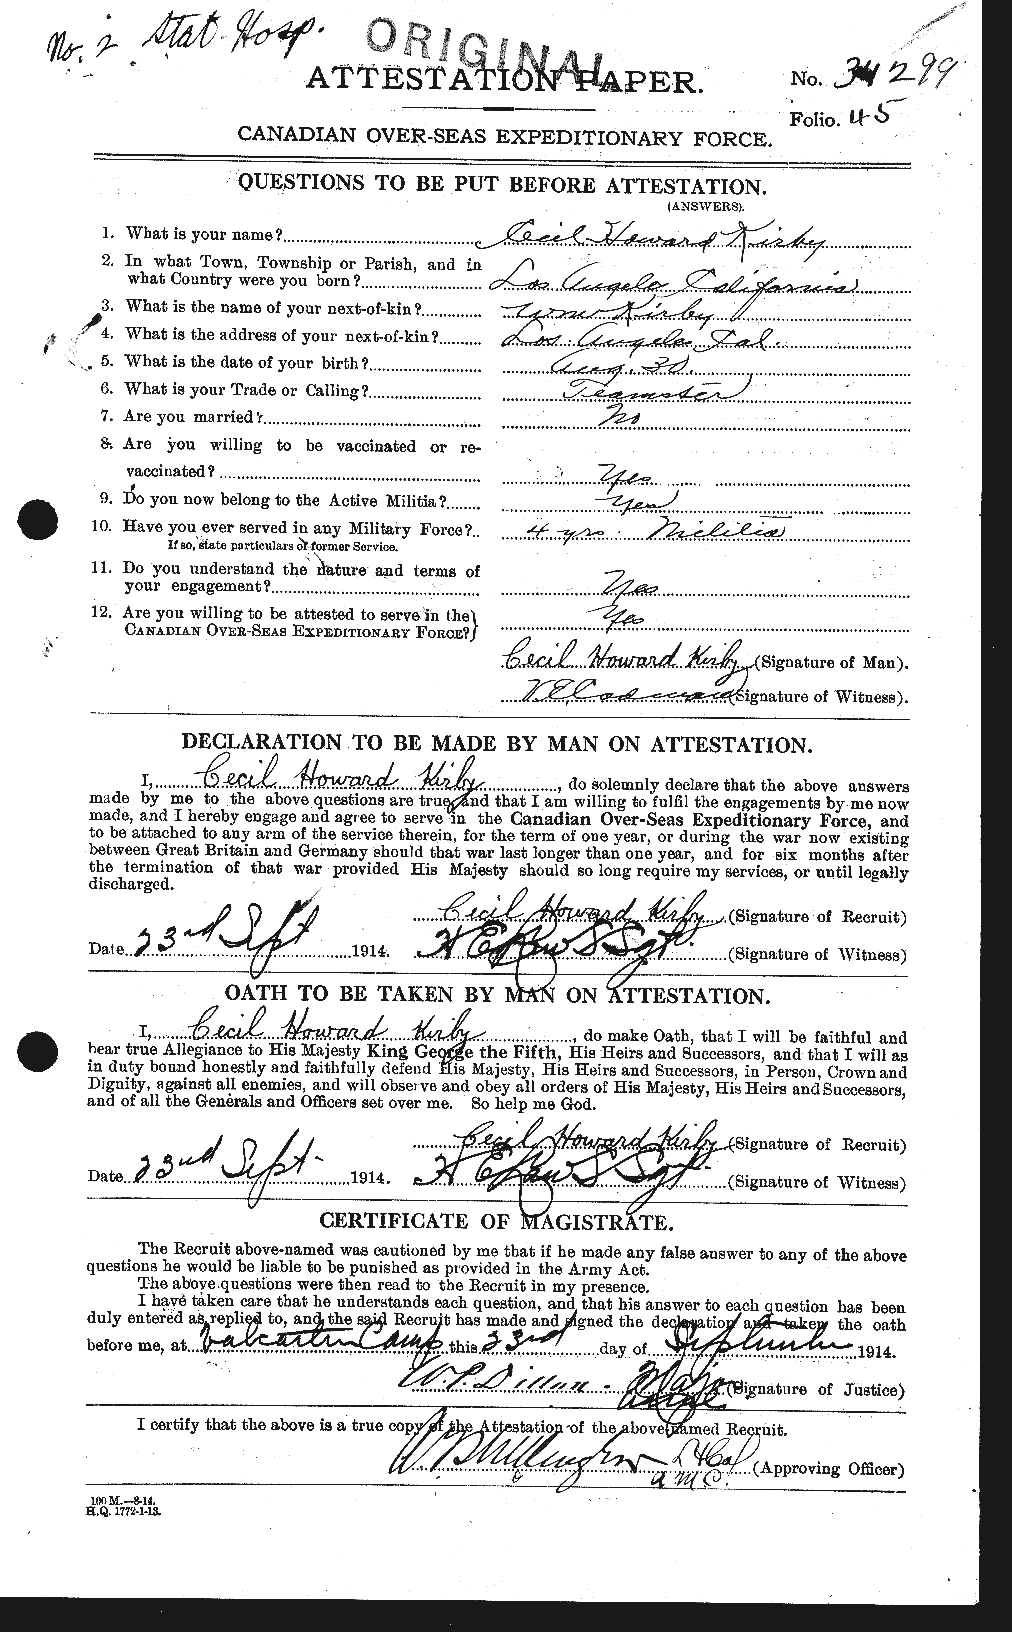 Personnel Records of the First World War - CEF 437161a